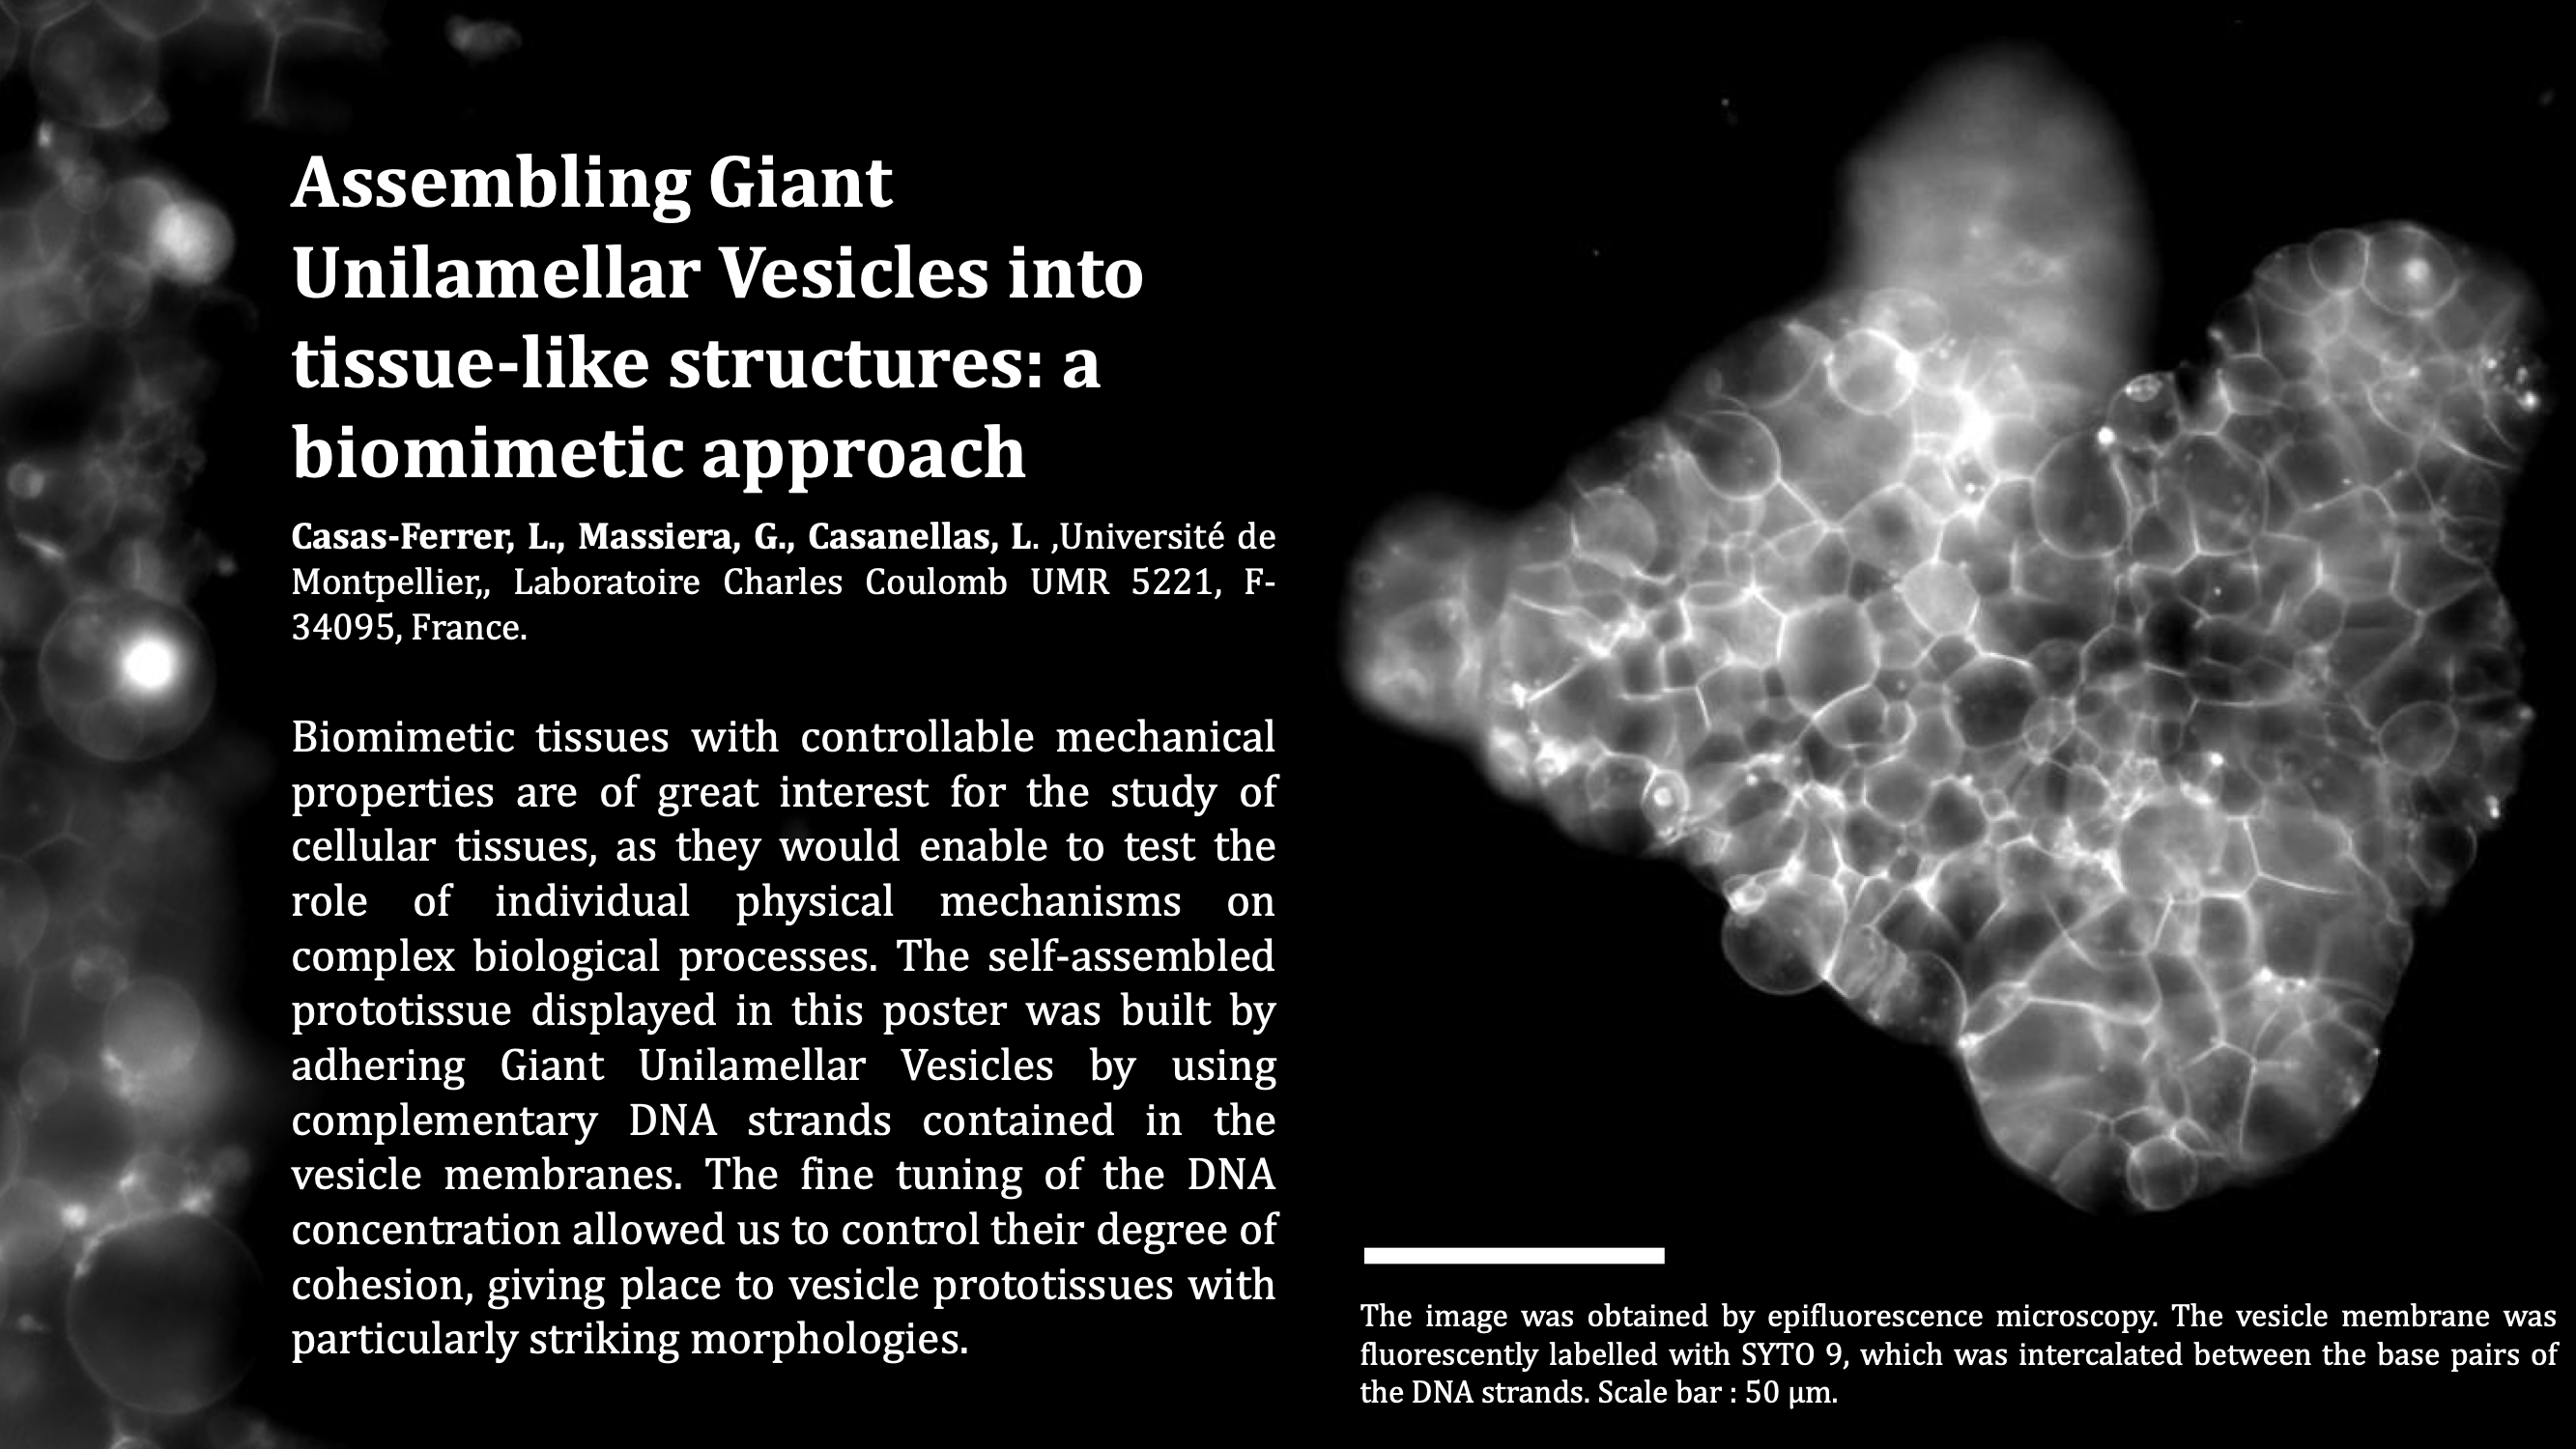 Assembling Giant Unilamellar Vesicles into tissue-like structures: a biomimetic approach